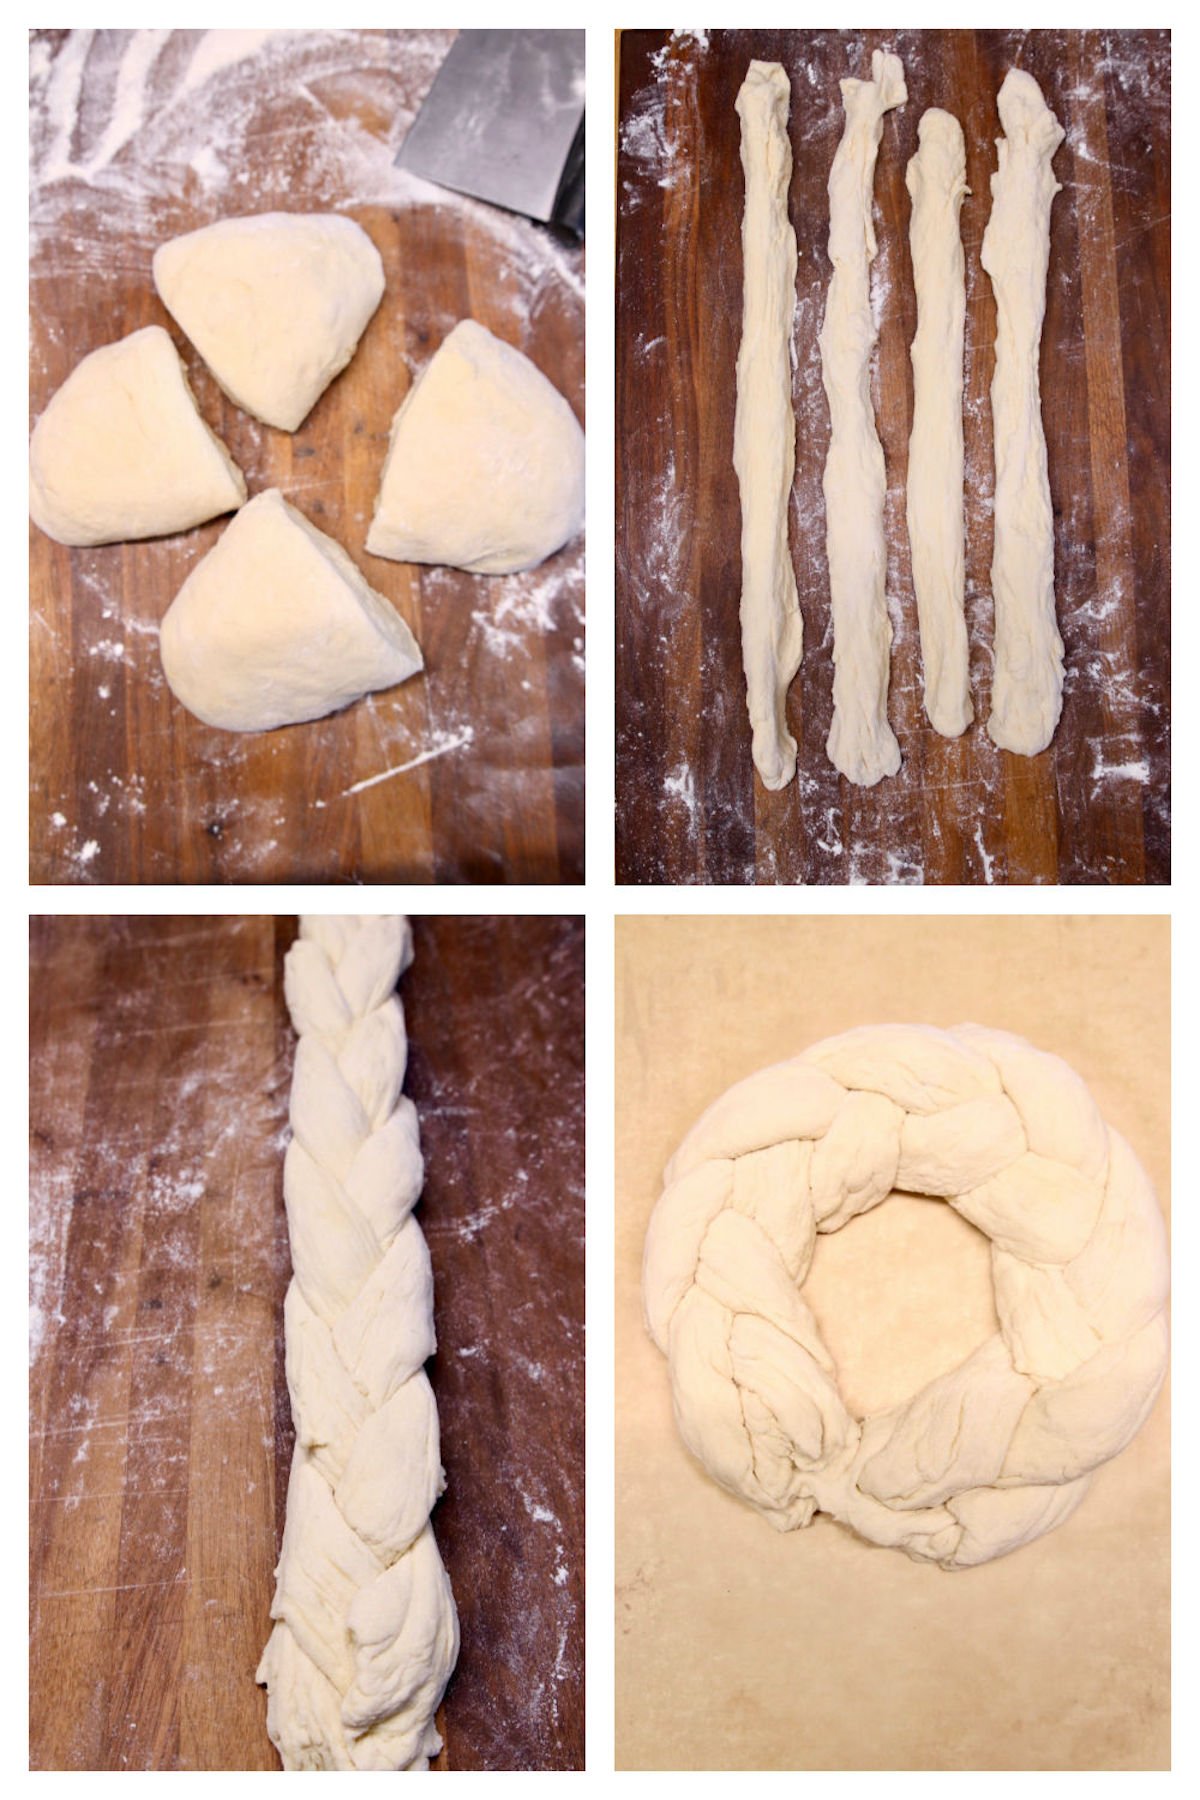 cutting and shaping dough into a braid and wreath